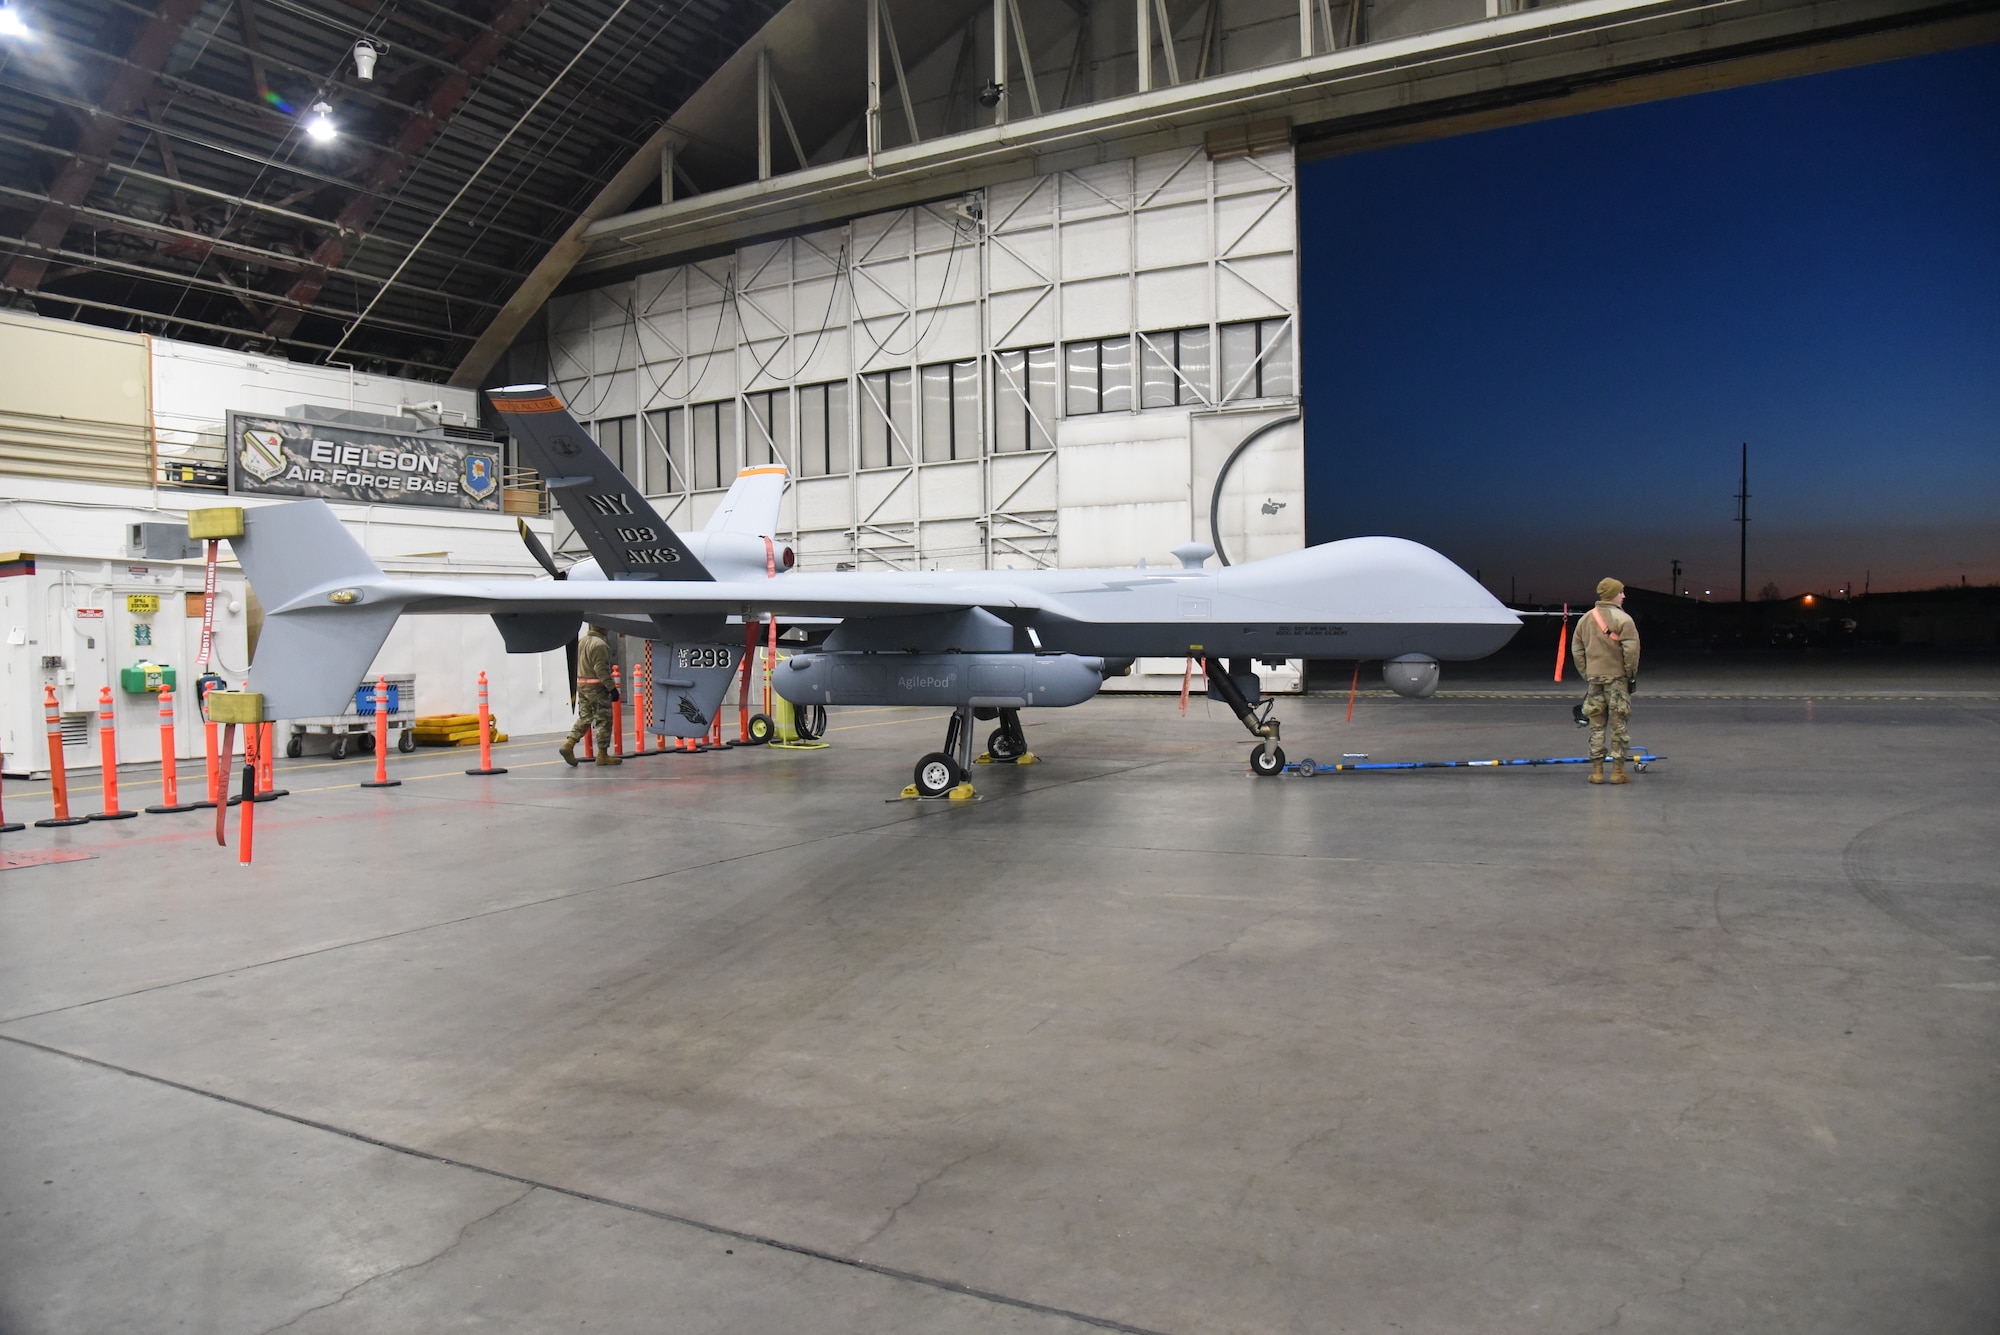 A 174th Attack Wing MQ-9 Reaper prepares for flight at Eielson Air Force Base during exercise Northern Edge 21. The 174th has partnered with multiple DoD contractors and academia to lead the effort in establishing new and additional capabilities for the MQ-9 Reaper. This two-week long exercise that took place from May 3-15. Northern Edge is Alaska’s premier joint-training exercise designed to practice operations and enhance interoperability among the services. (U.S. Air National Guard photo by Airman 1st Class Tiffany Scofield )